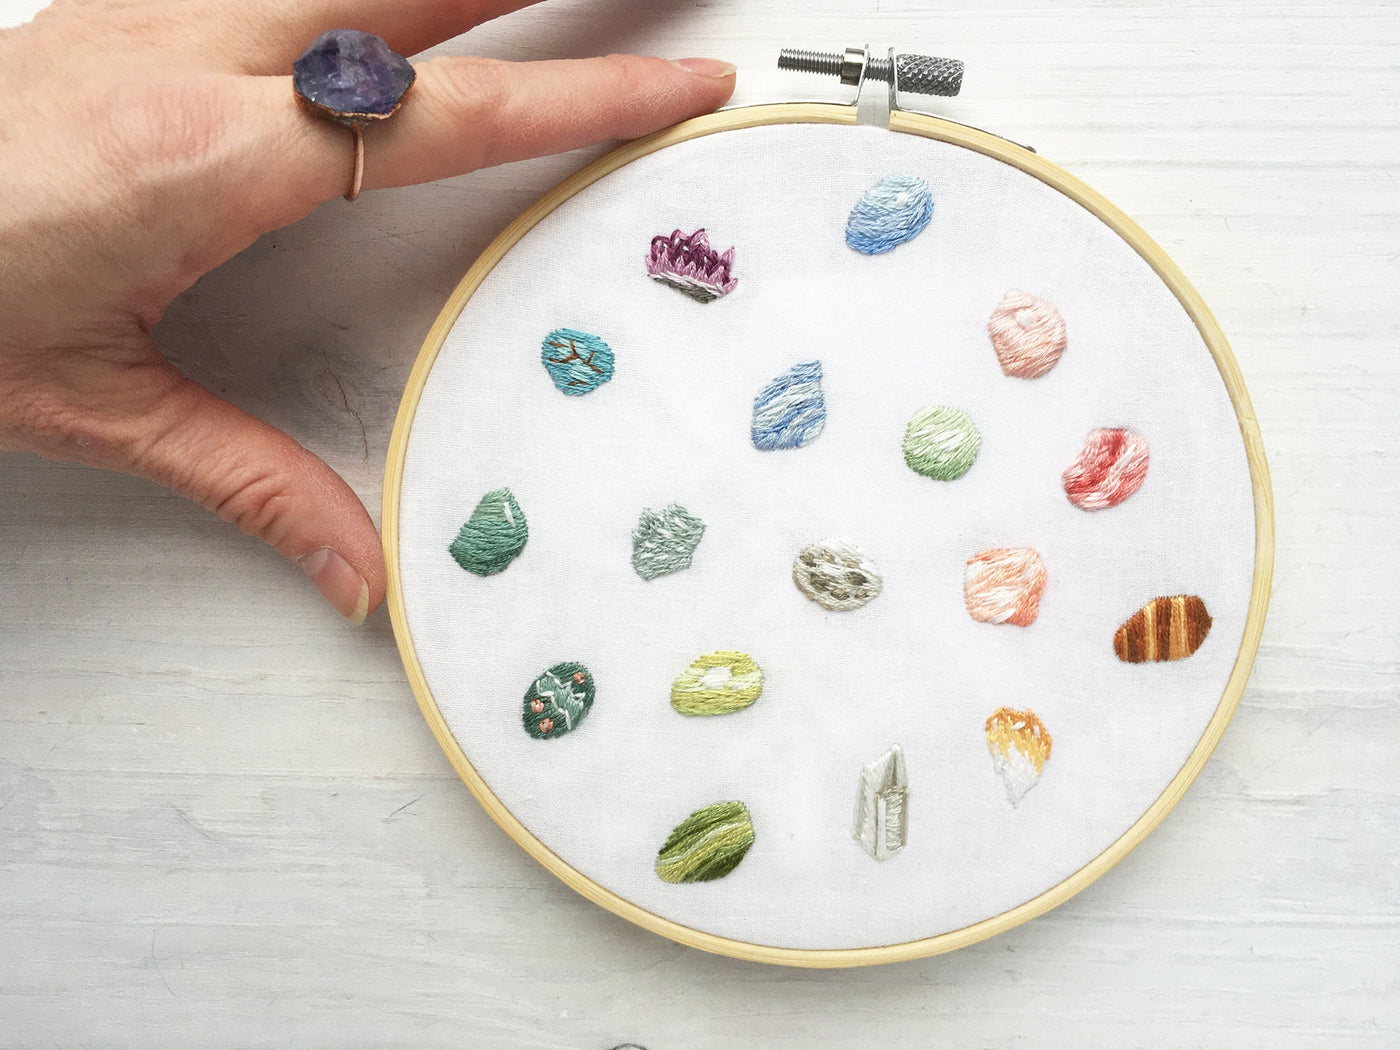 Tiny Crystals and Gemstones hand embroidery pattern download